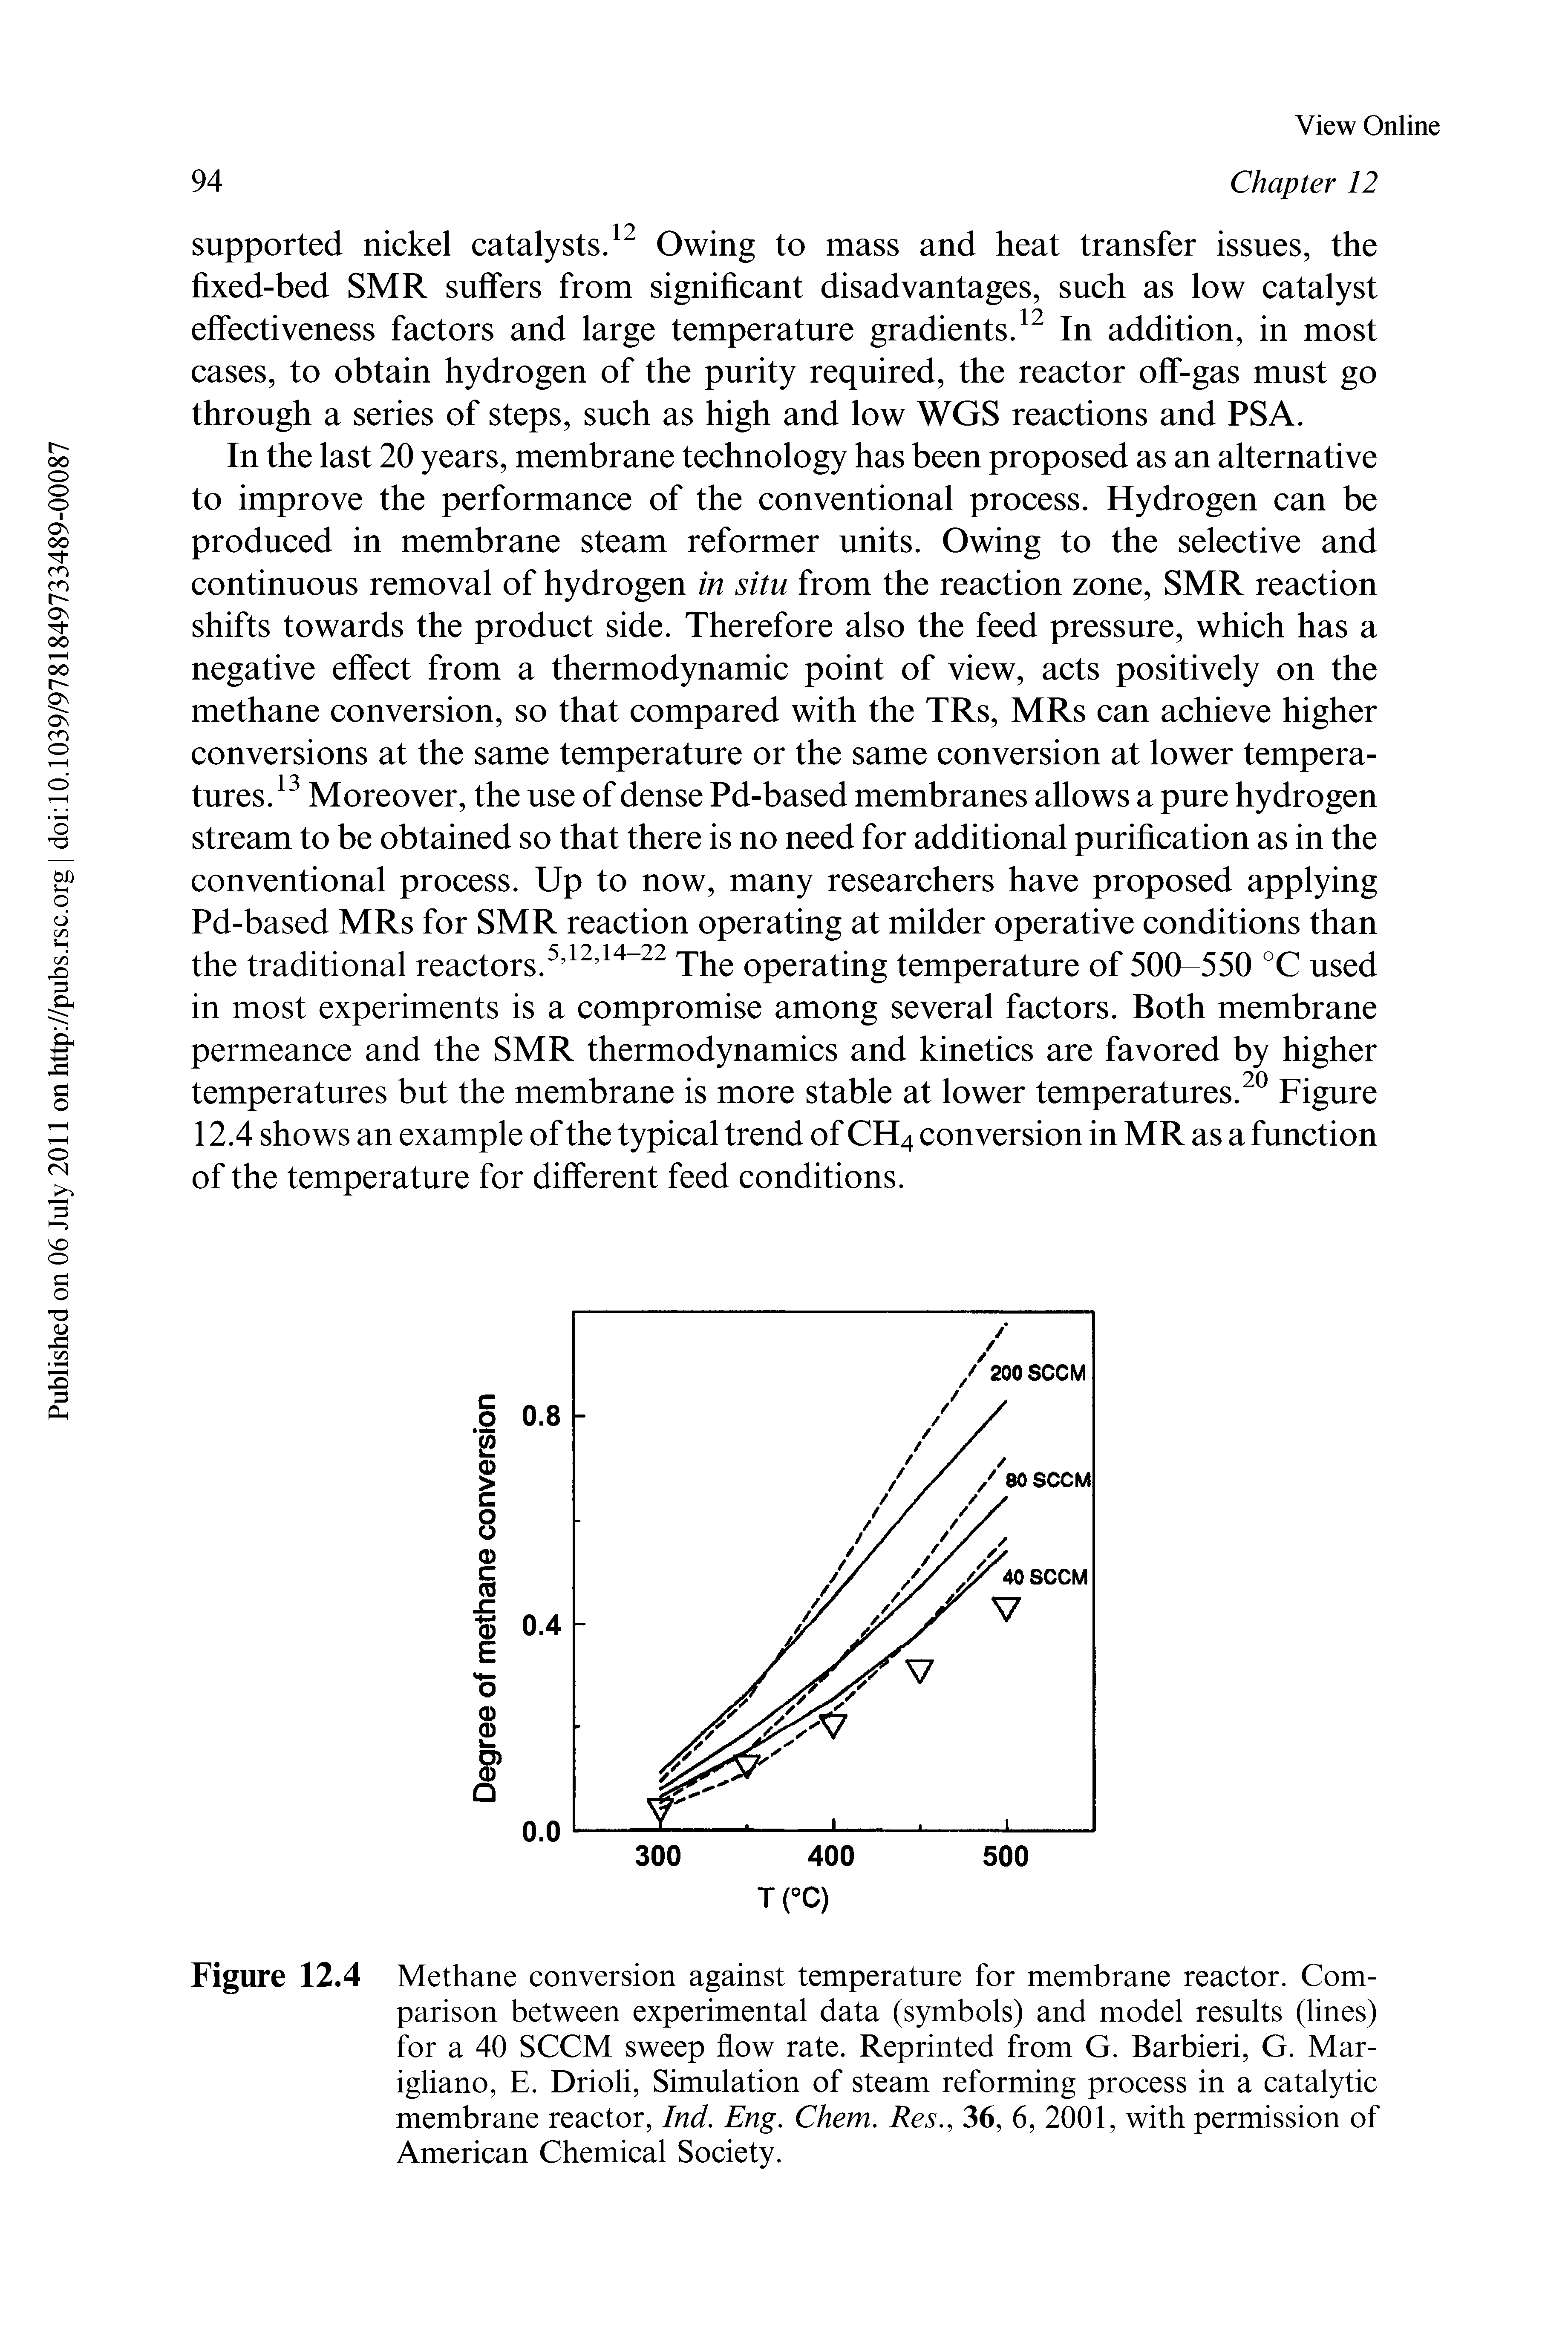 Figure 12.4 Methane conversion against temperature for membrane reactor. Comparison between experimental data (symbols) and model results (lines) for a 40 SCCM sweep flow rate. Reprinted from G. Barbieri, G. Mar-igliano, E. Drioli, Simulation of steam reforming process in a catalytic membrane reactor, Ind. Eng. Chem. Res., 36, 6, 2001, with permission of American Chemical Society.